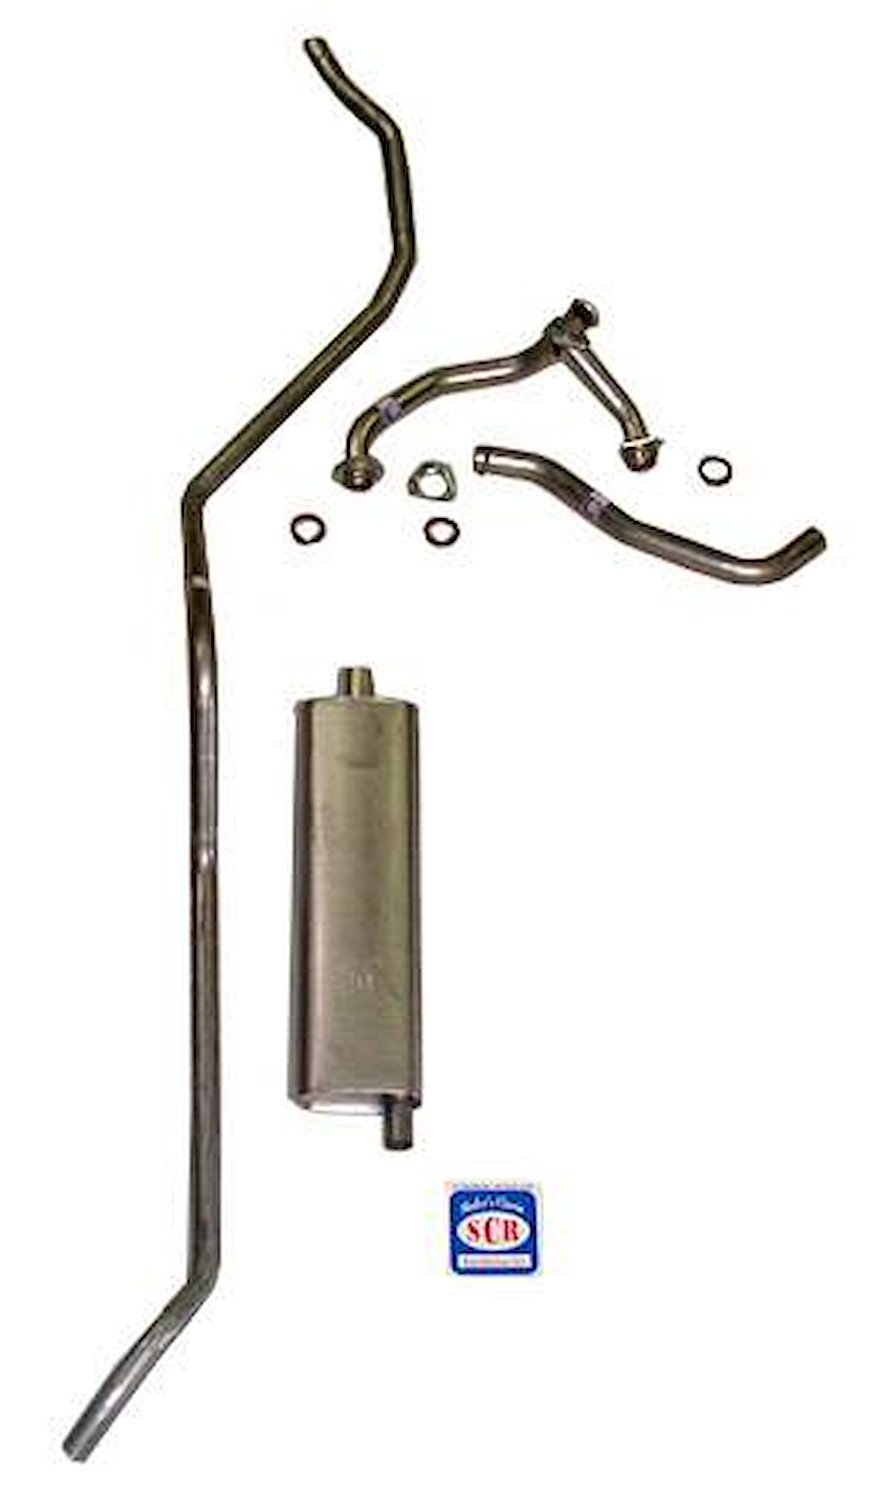 73042S 1958 Chevrolet Full-Size Exhaust System 8-cyl 283 Single, 304 Stainless Steel